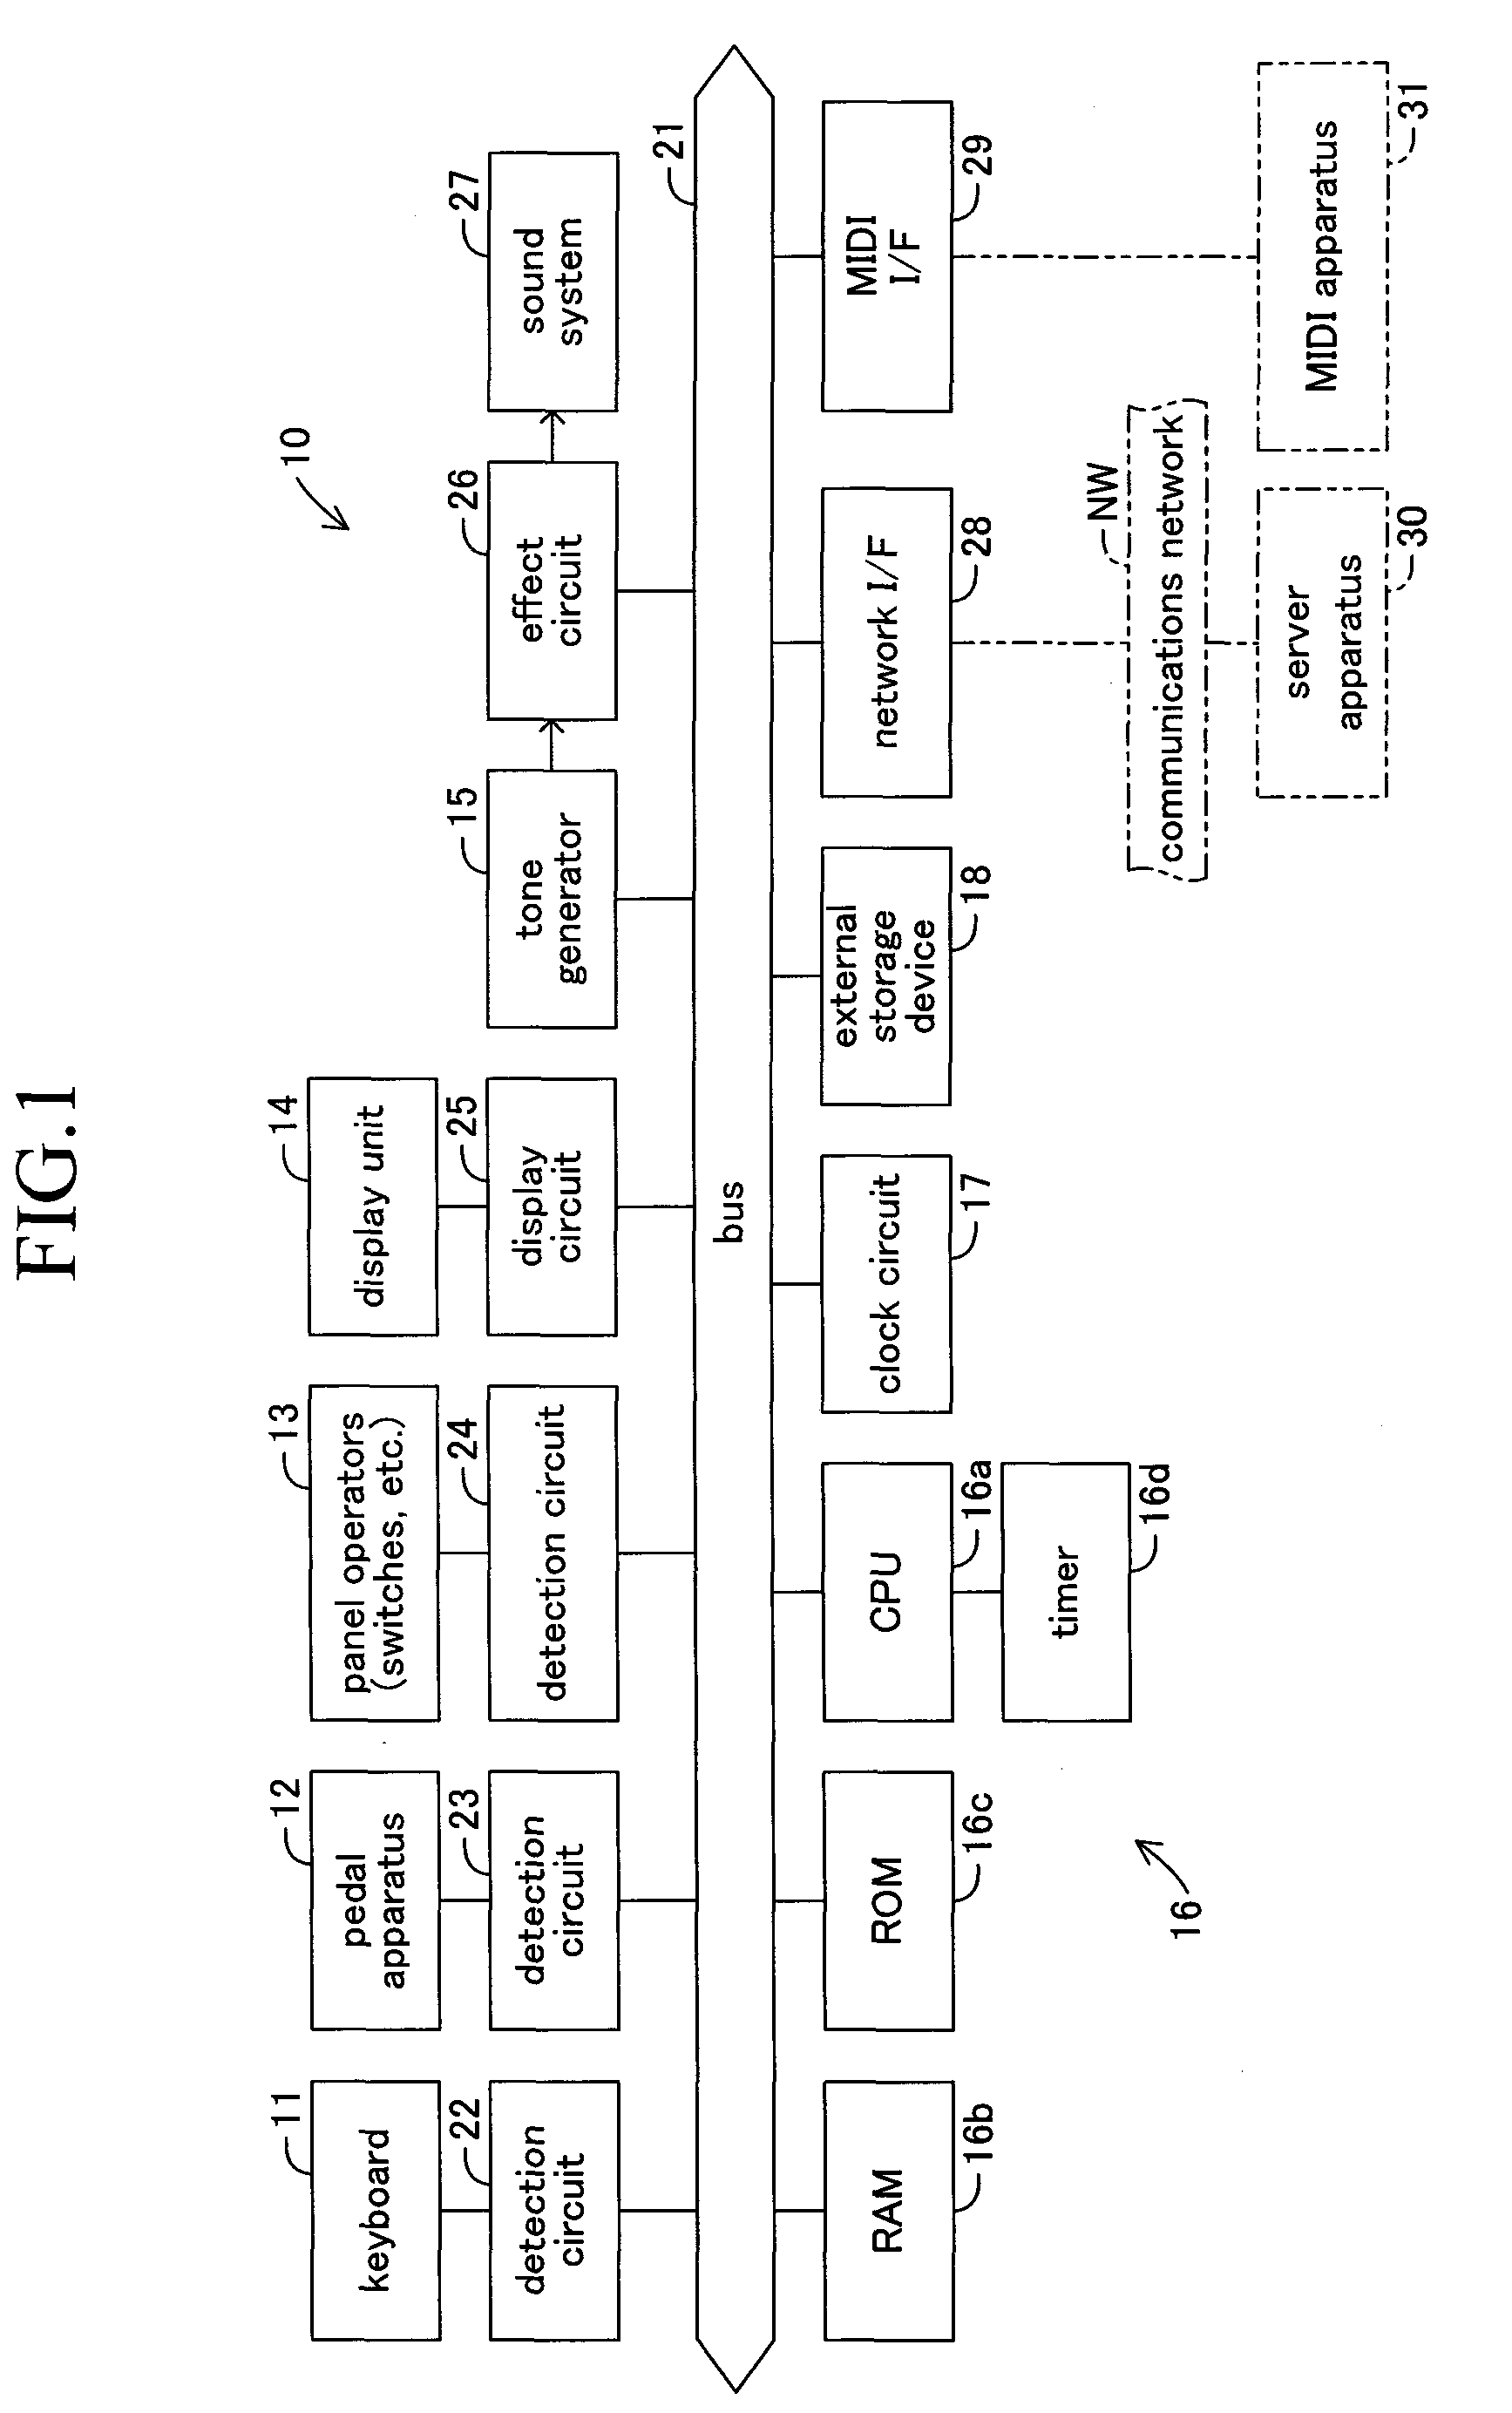 Pedal apparatus of electronic musical instrument